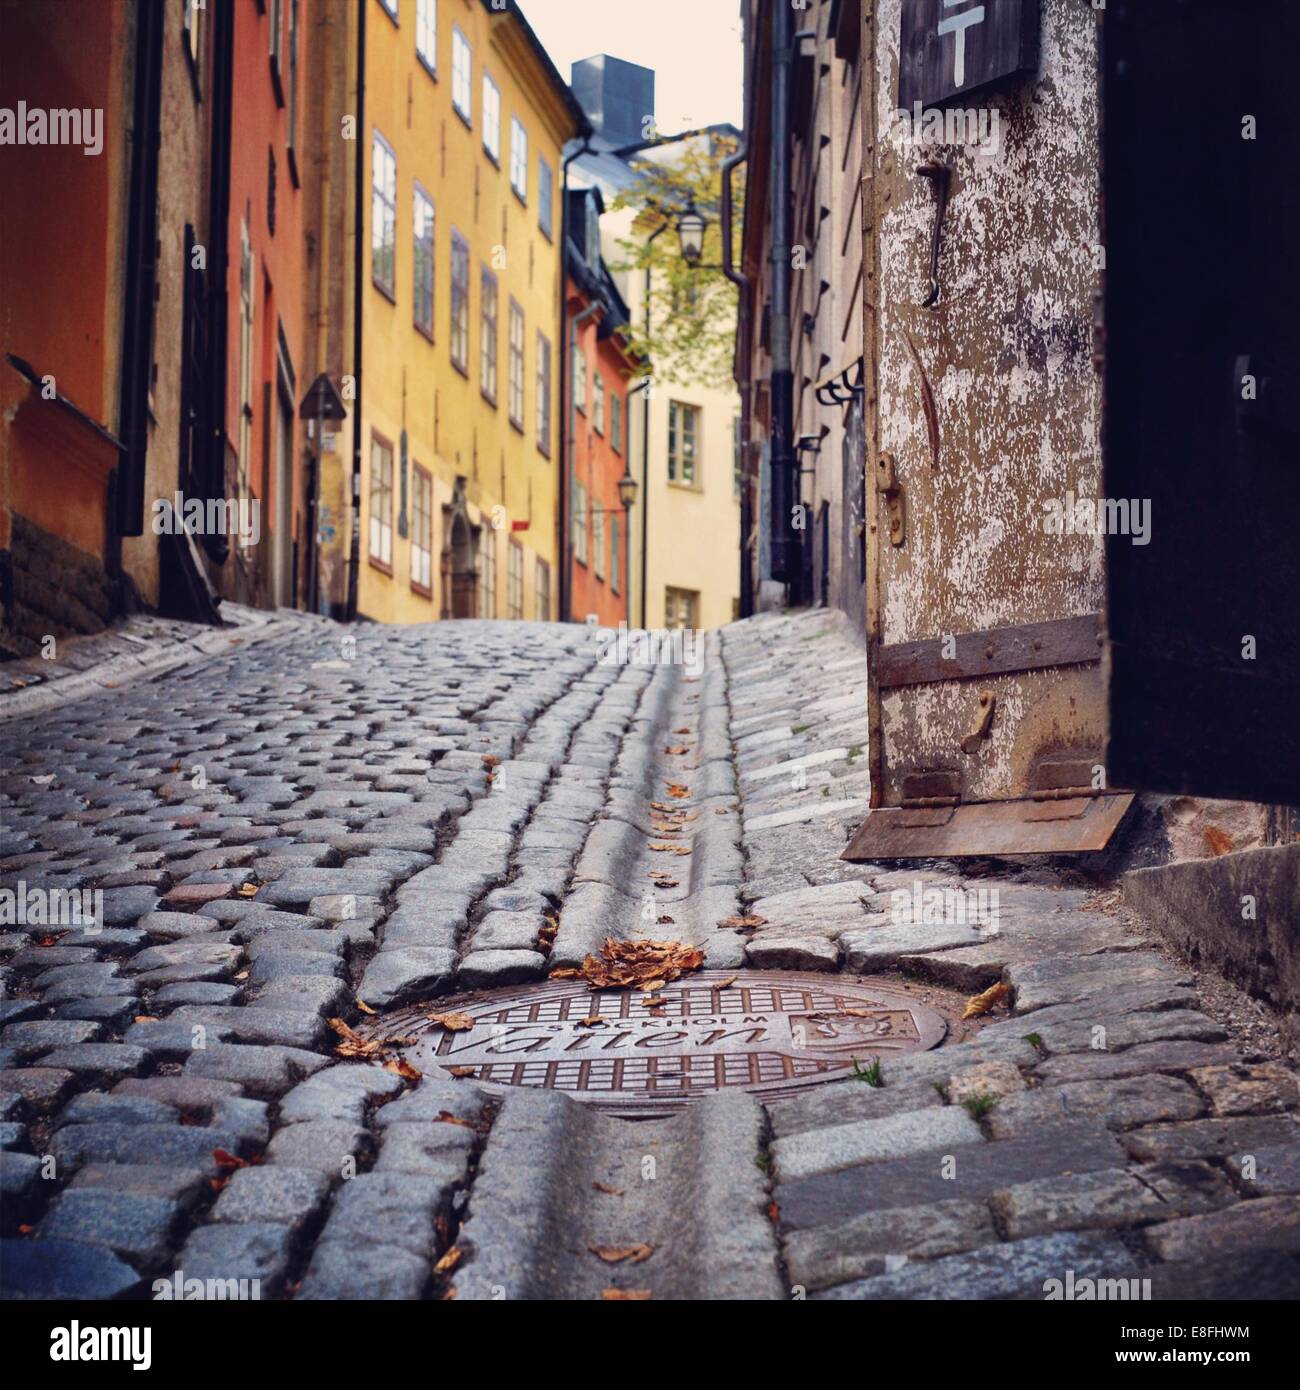 Sweden, Svealand, Stockholm,  Manhole cover in cobbled street Stock Photo